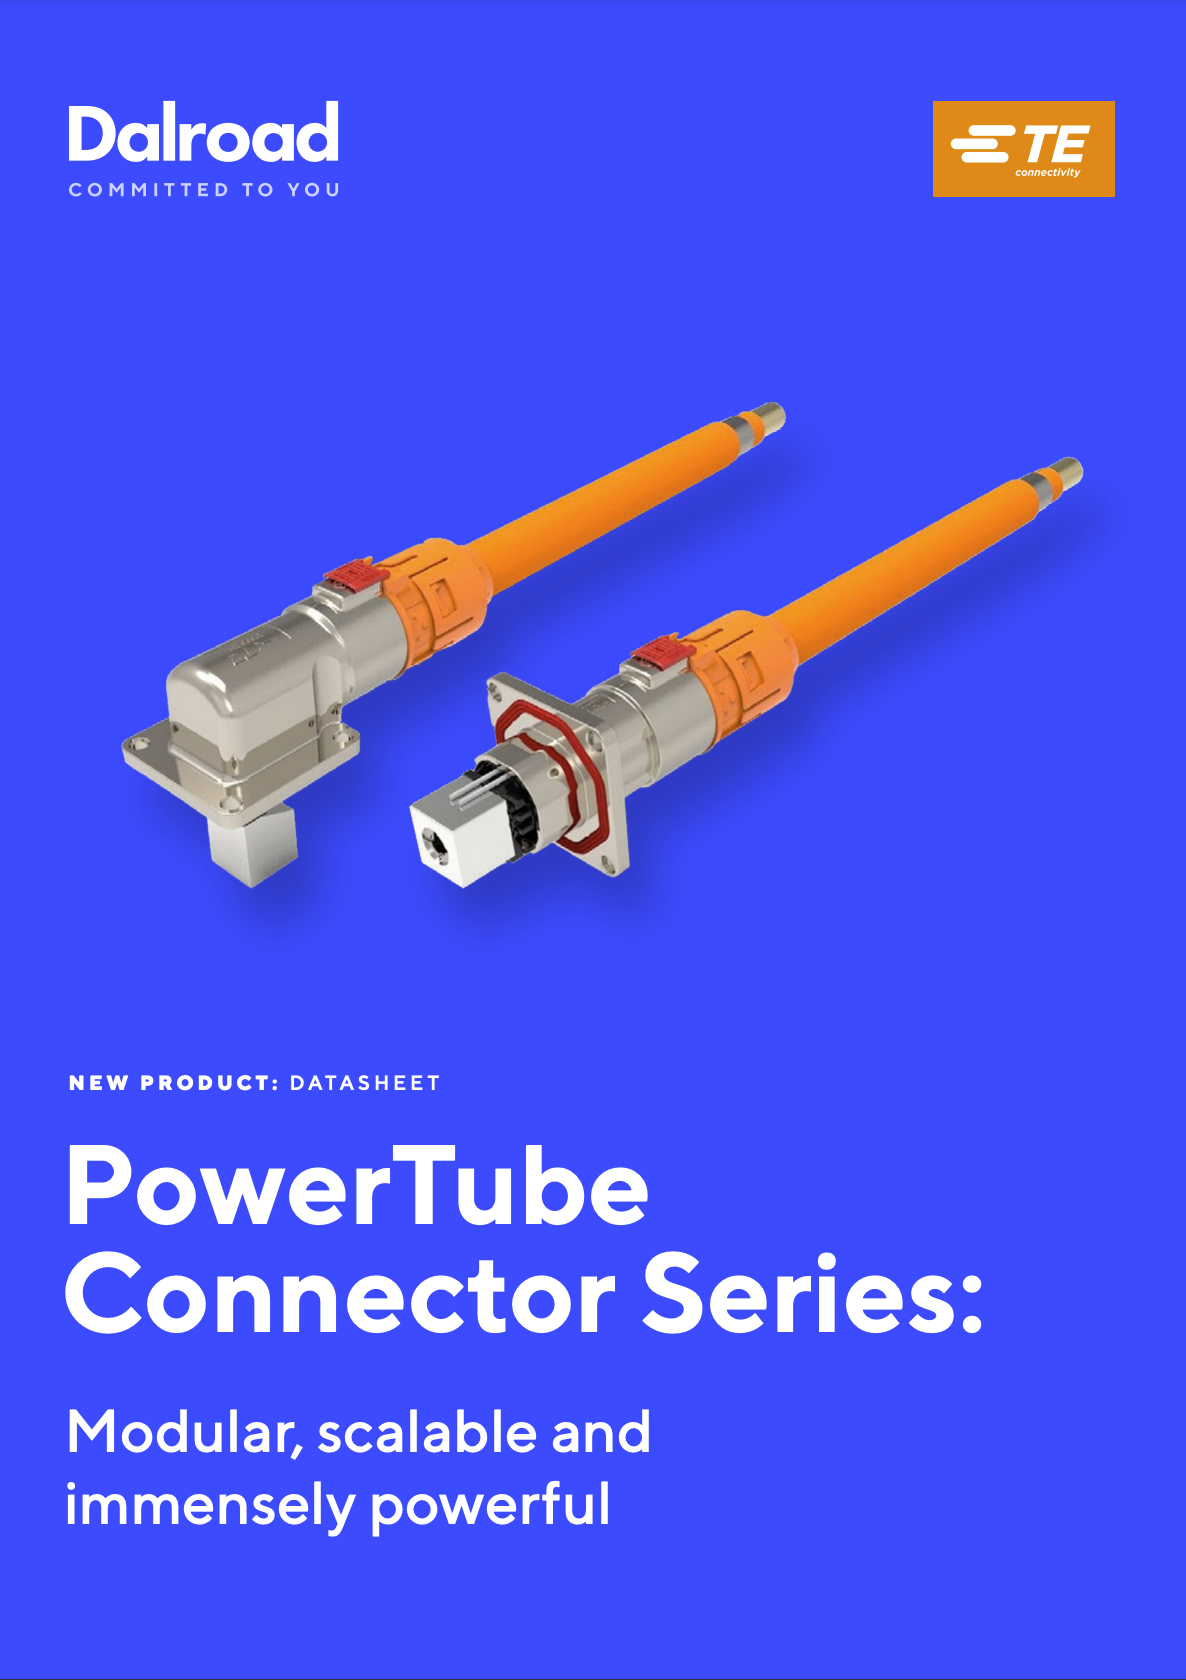 TE PowerTube Connector Series for 500 A and 1000 V Applications